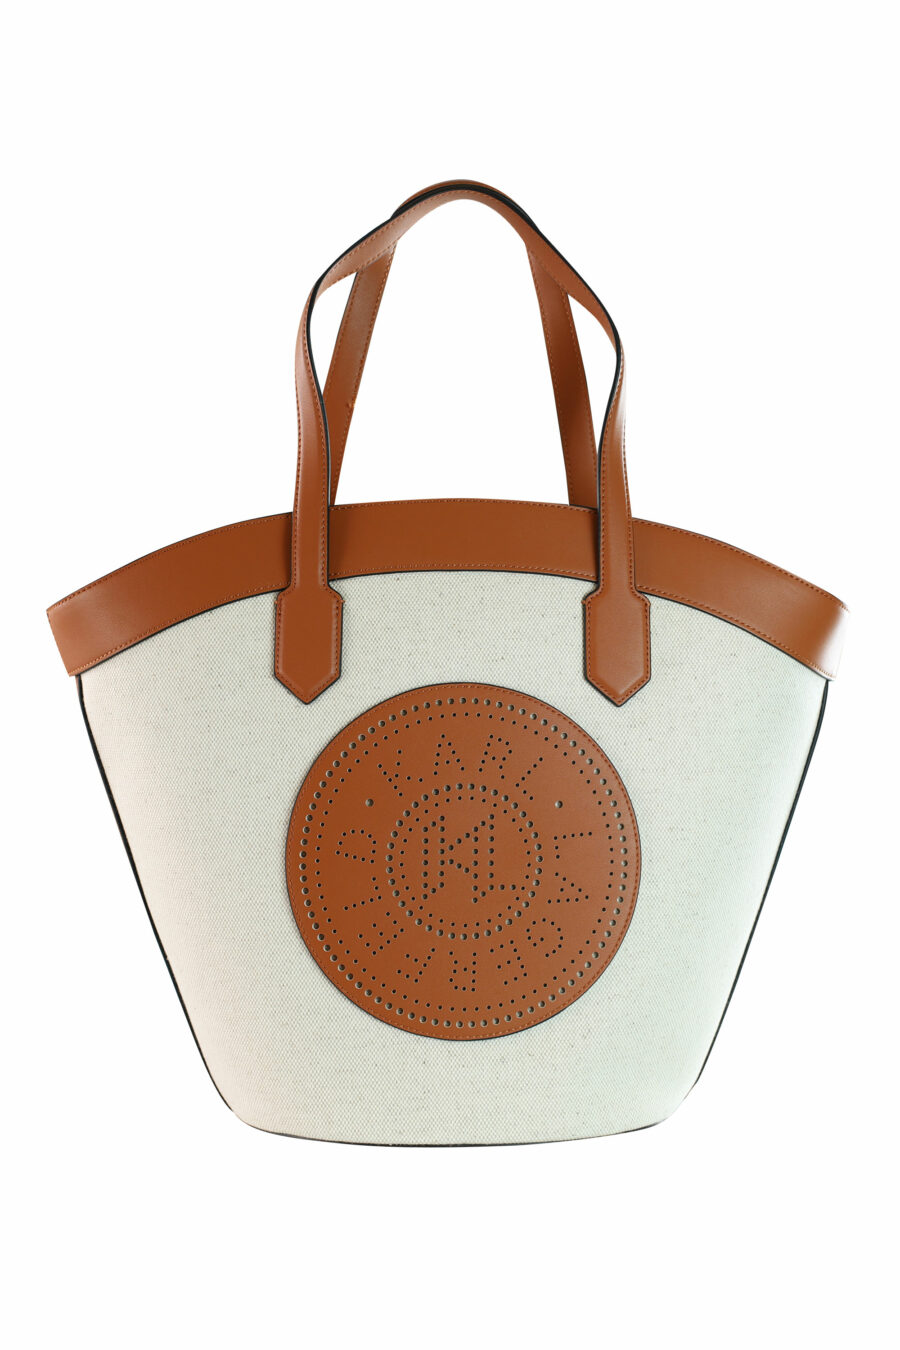 Tote bag white with brown and "k/tulip" logo - 8720744234777